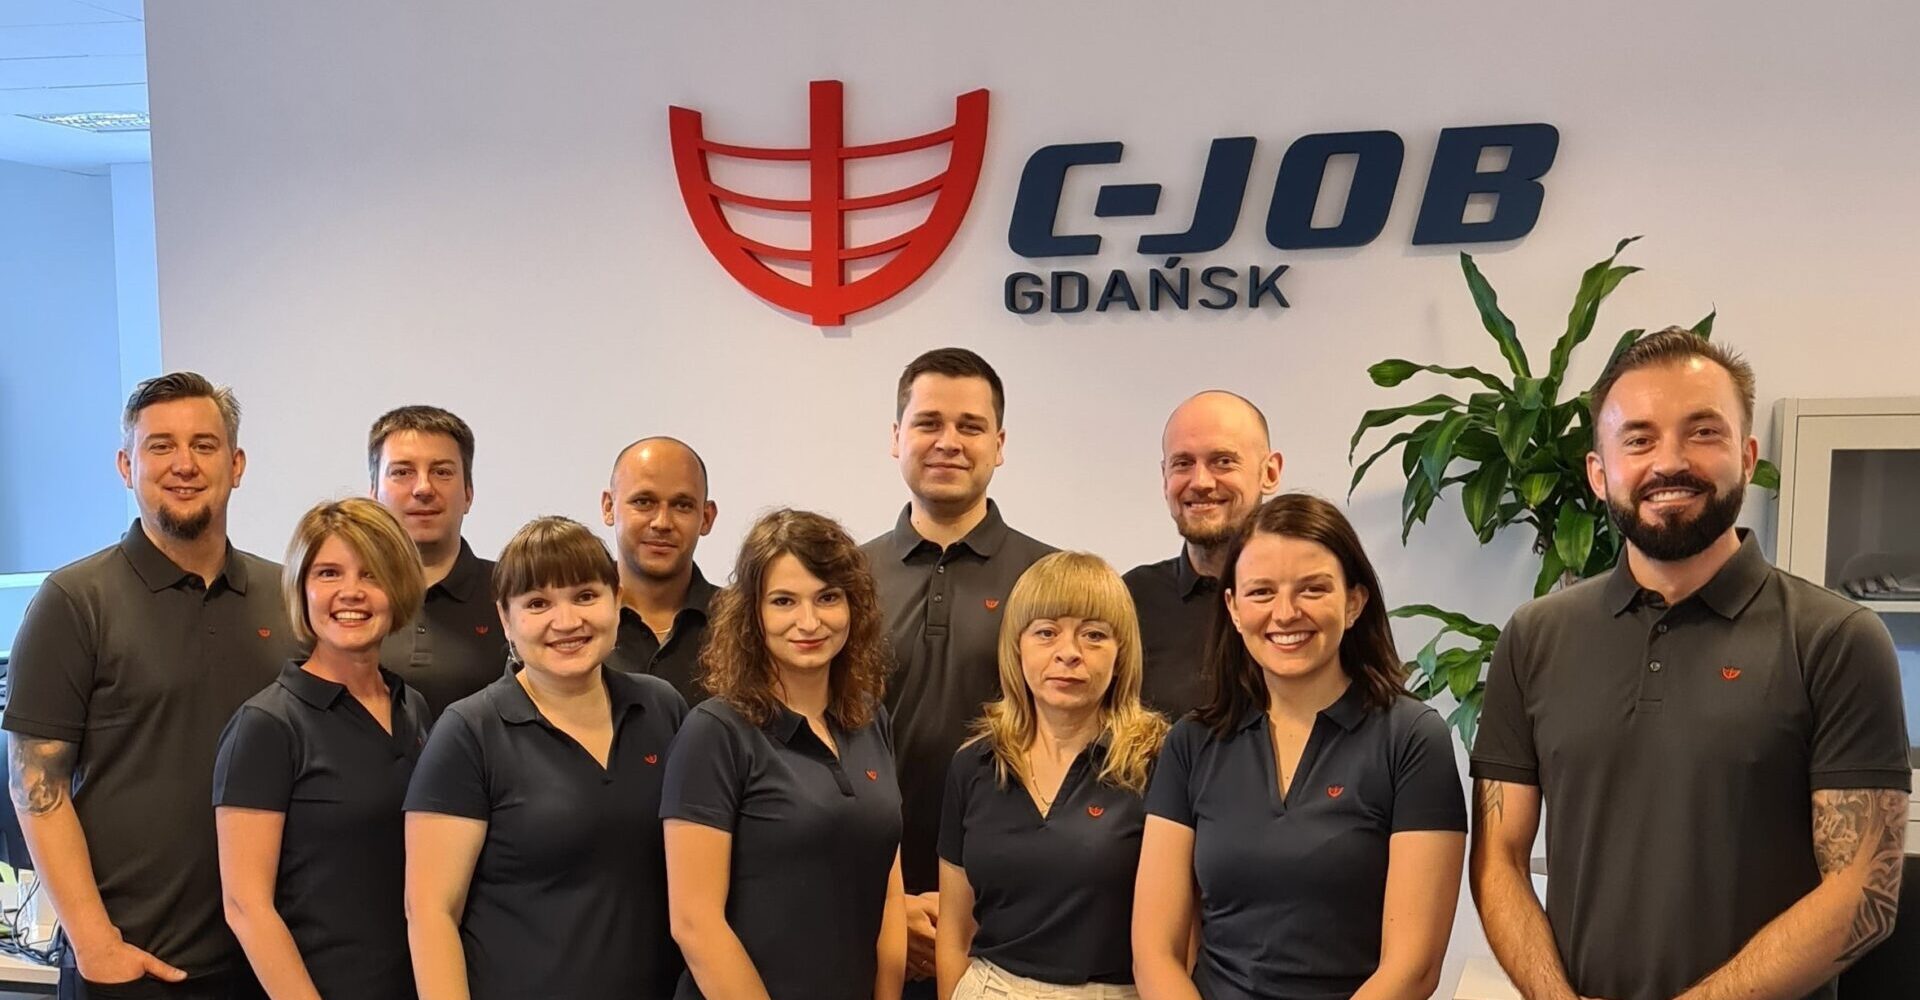 C-Job Gdansk in C-Job polos cropped